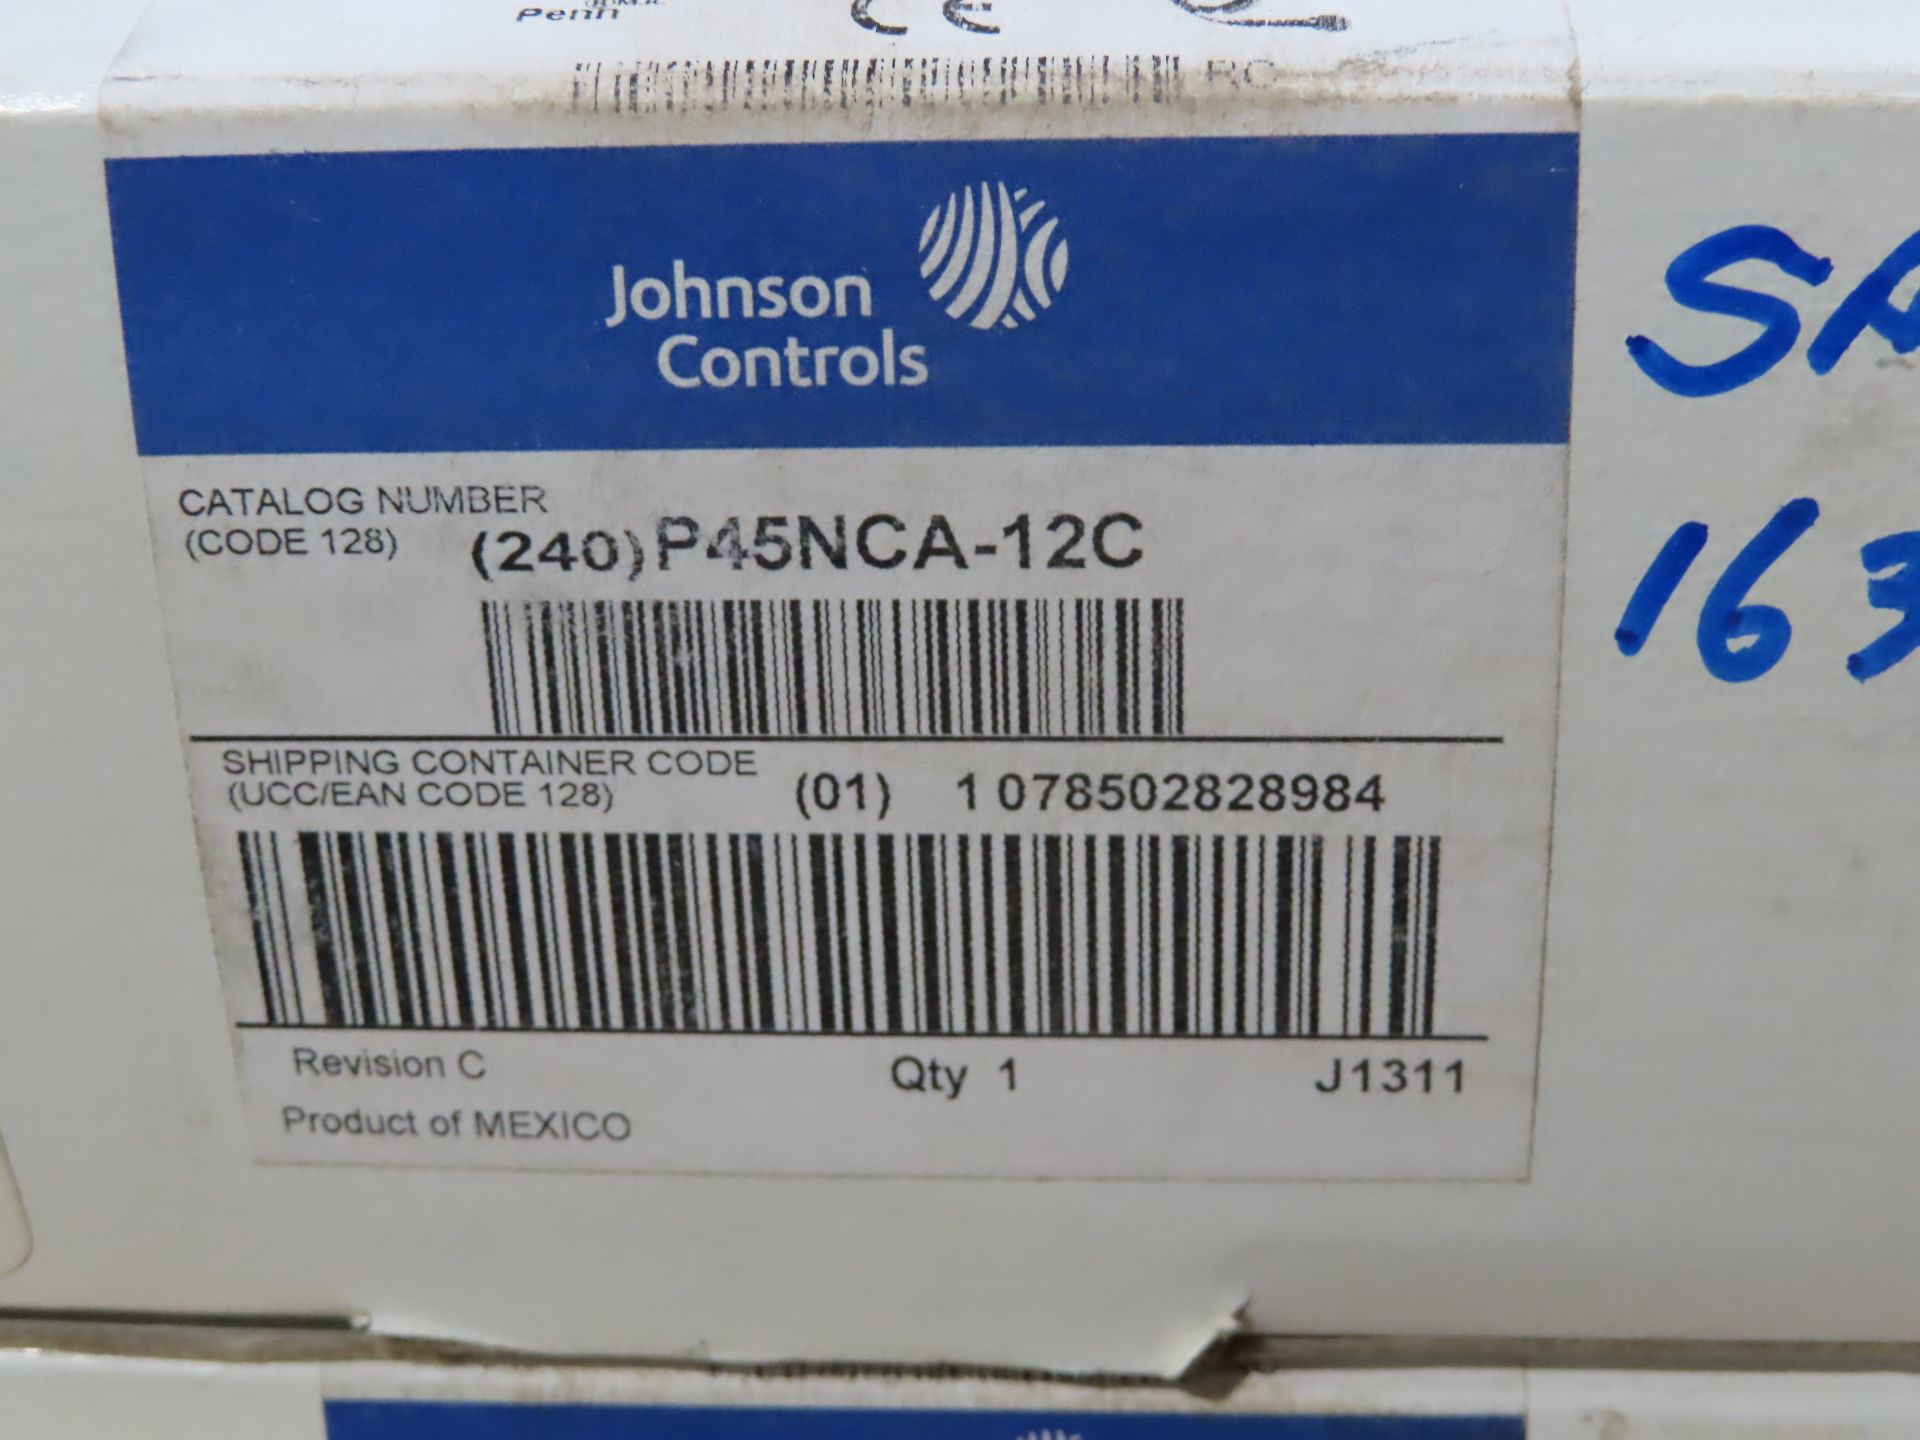 Qty 2 Johnson Controls model P45NCA-12C, new in boxes, as always, with Brolyn LLC auctions, all lots - Image 2 of 2